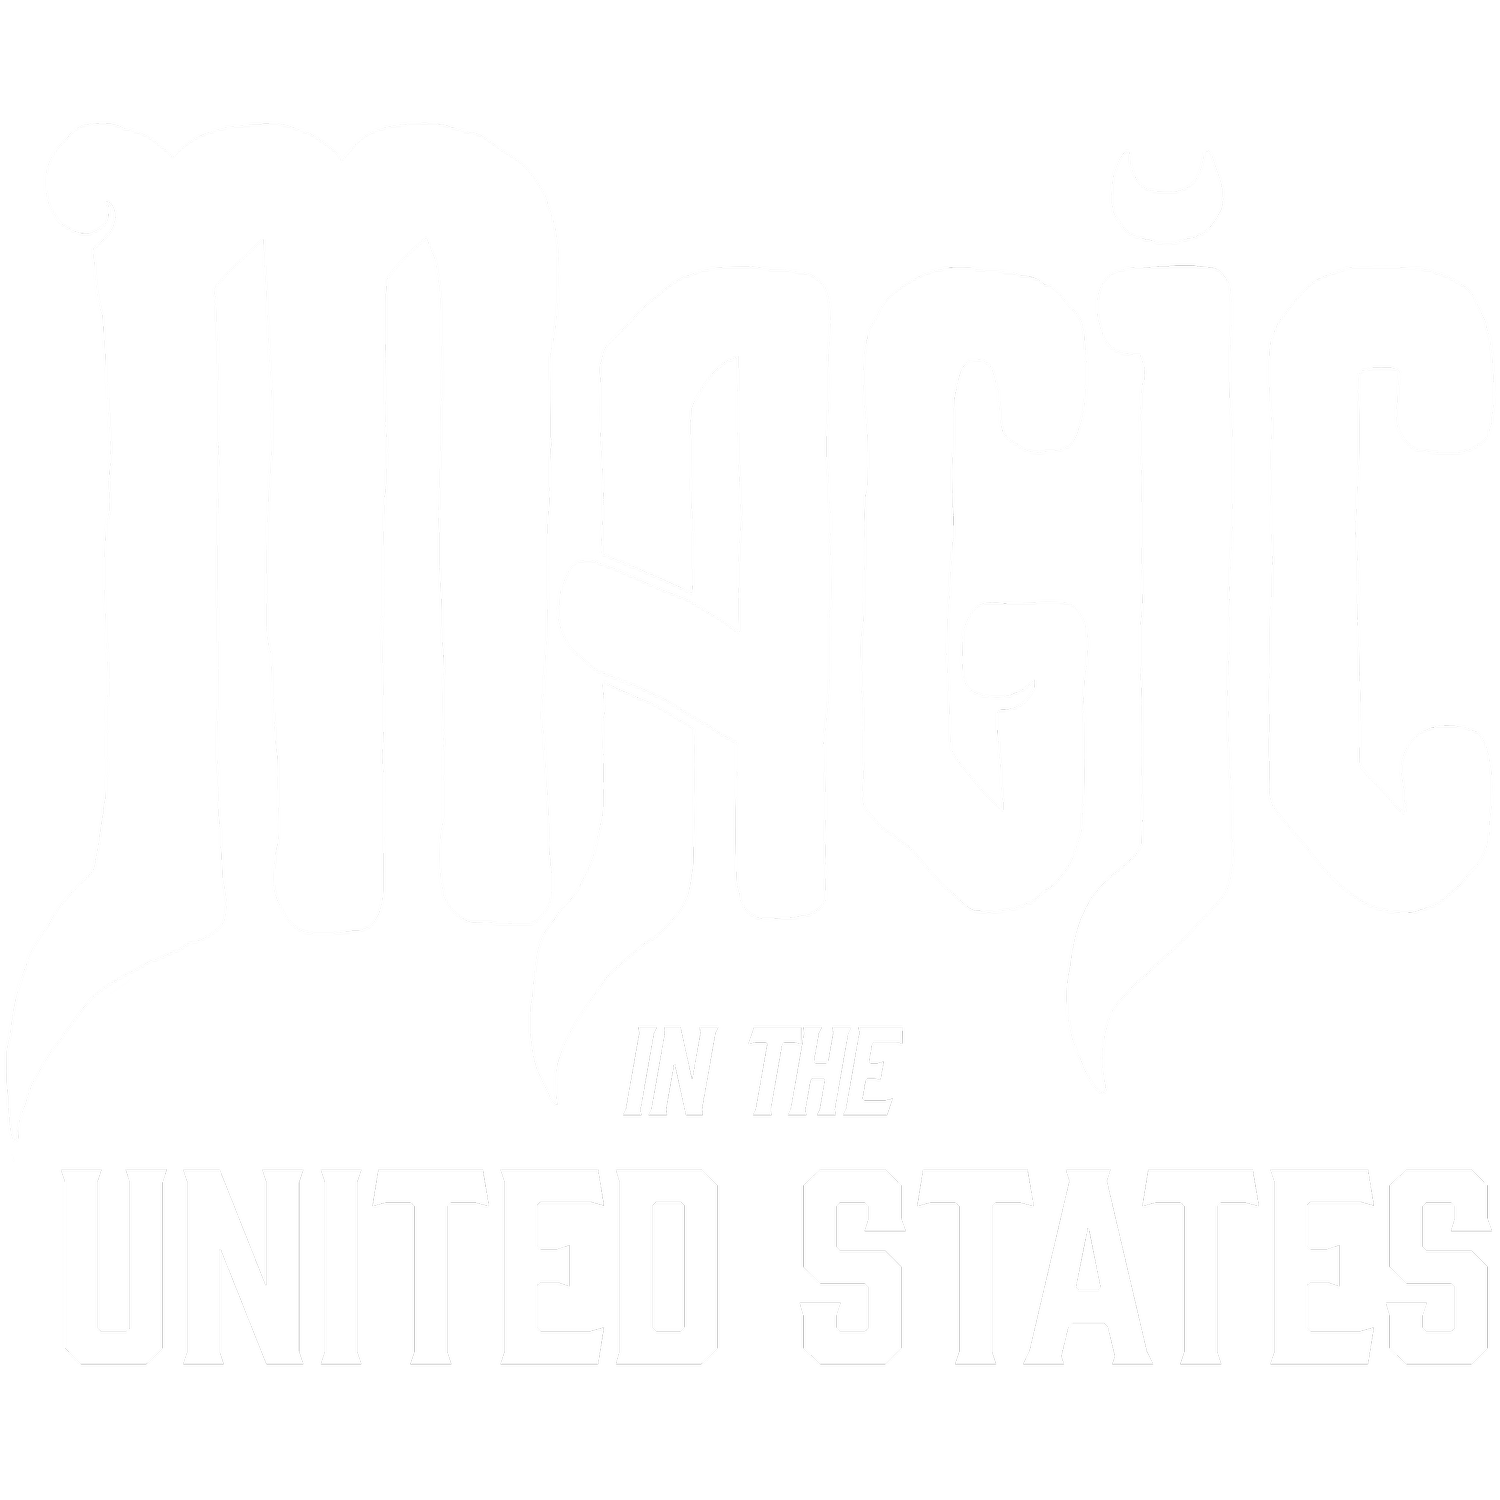 Magic in the United States